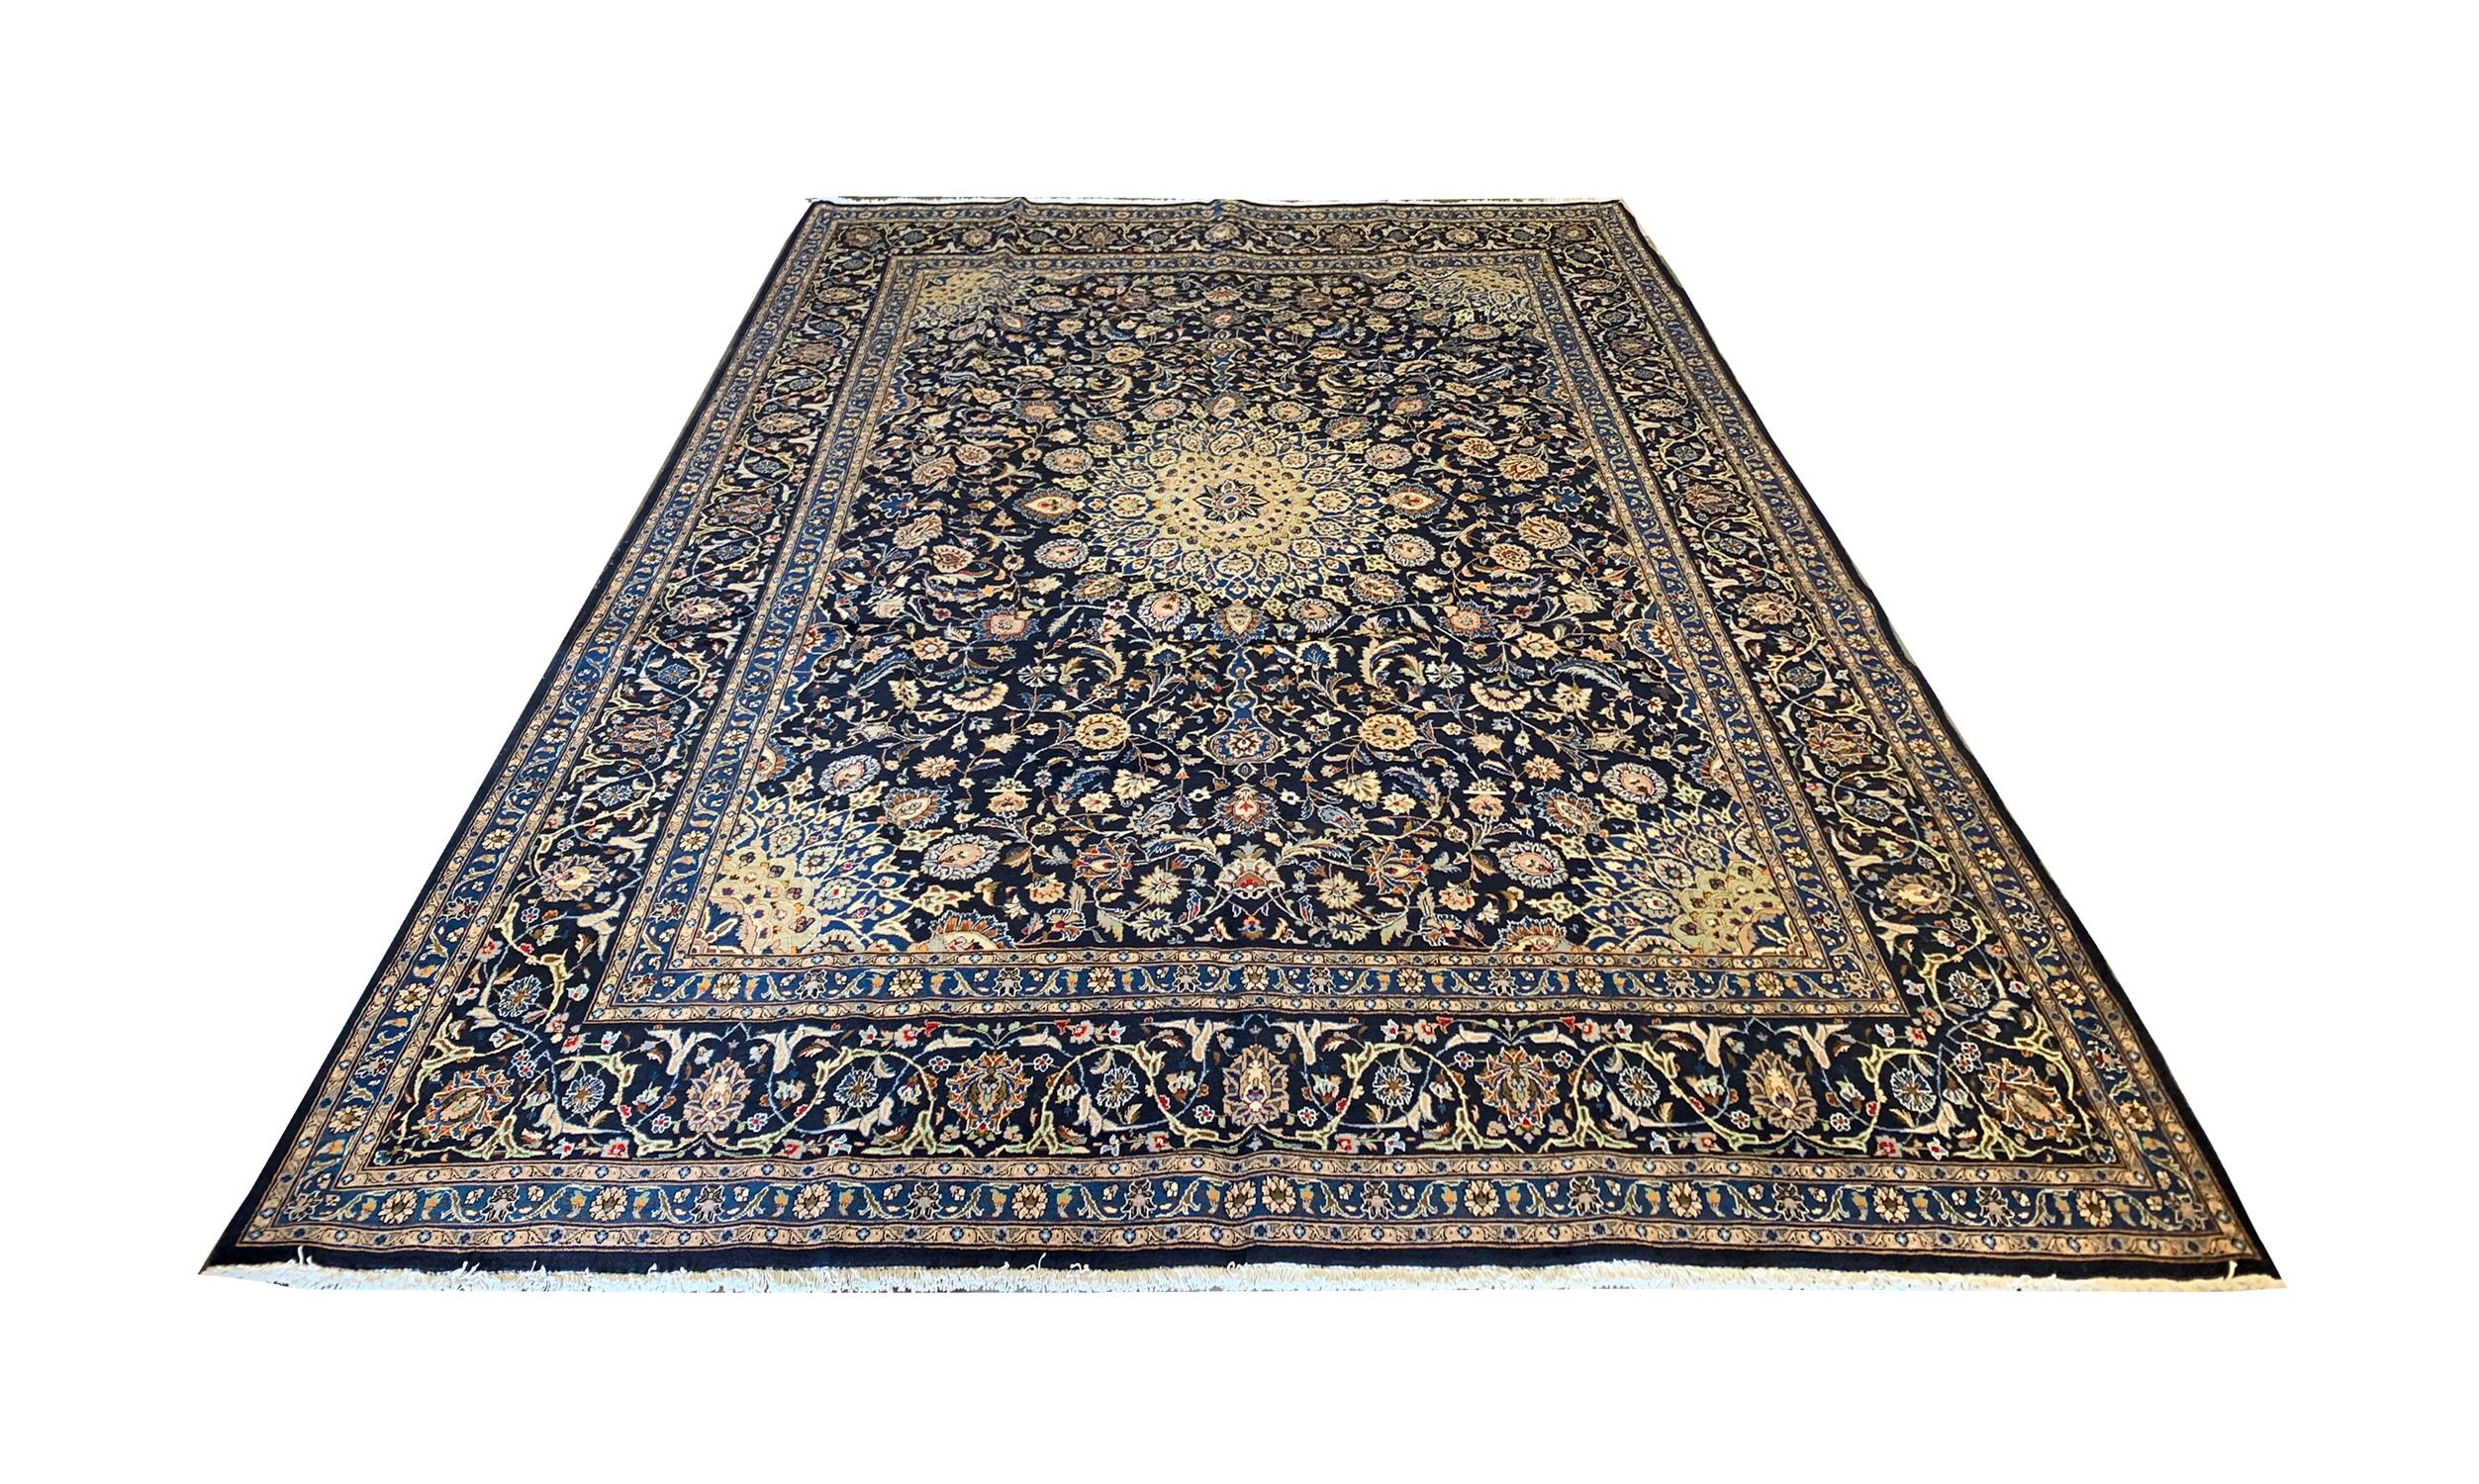 This elegant handwoven wool carpet was woven in Azerbaijan Circa 1960. The central design features a magnificent medallion design woven on a deep blue background with accents of beige, cream and light blue that make up the delicate floral patterns.